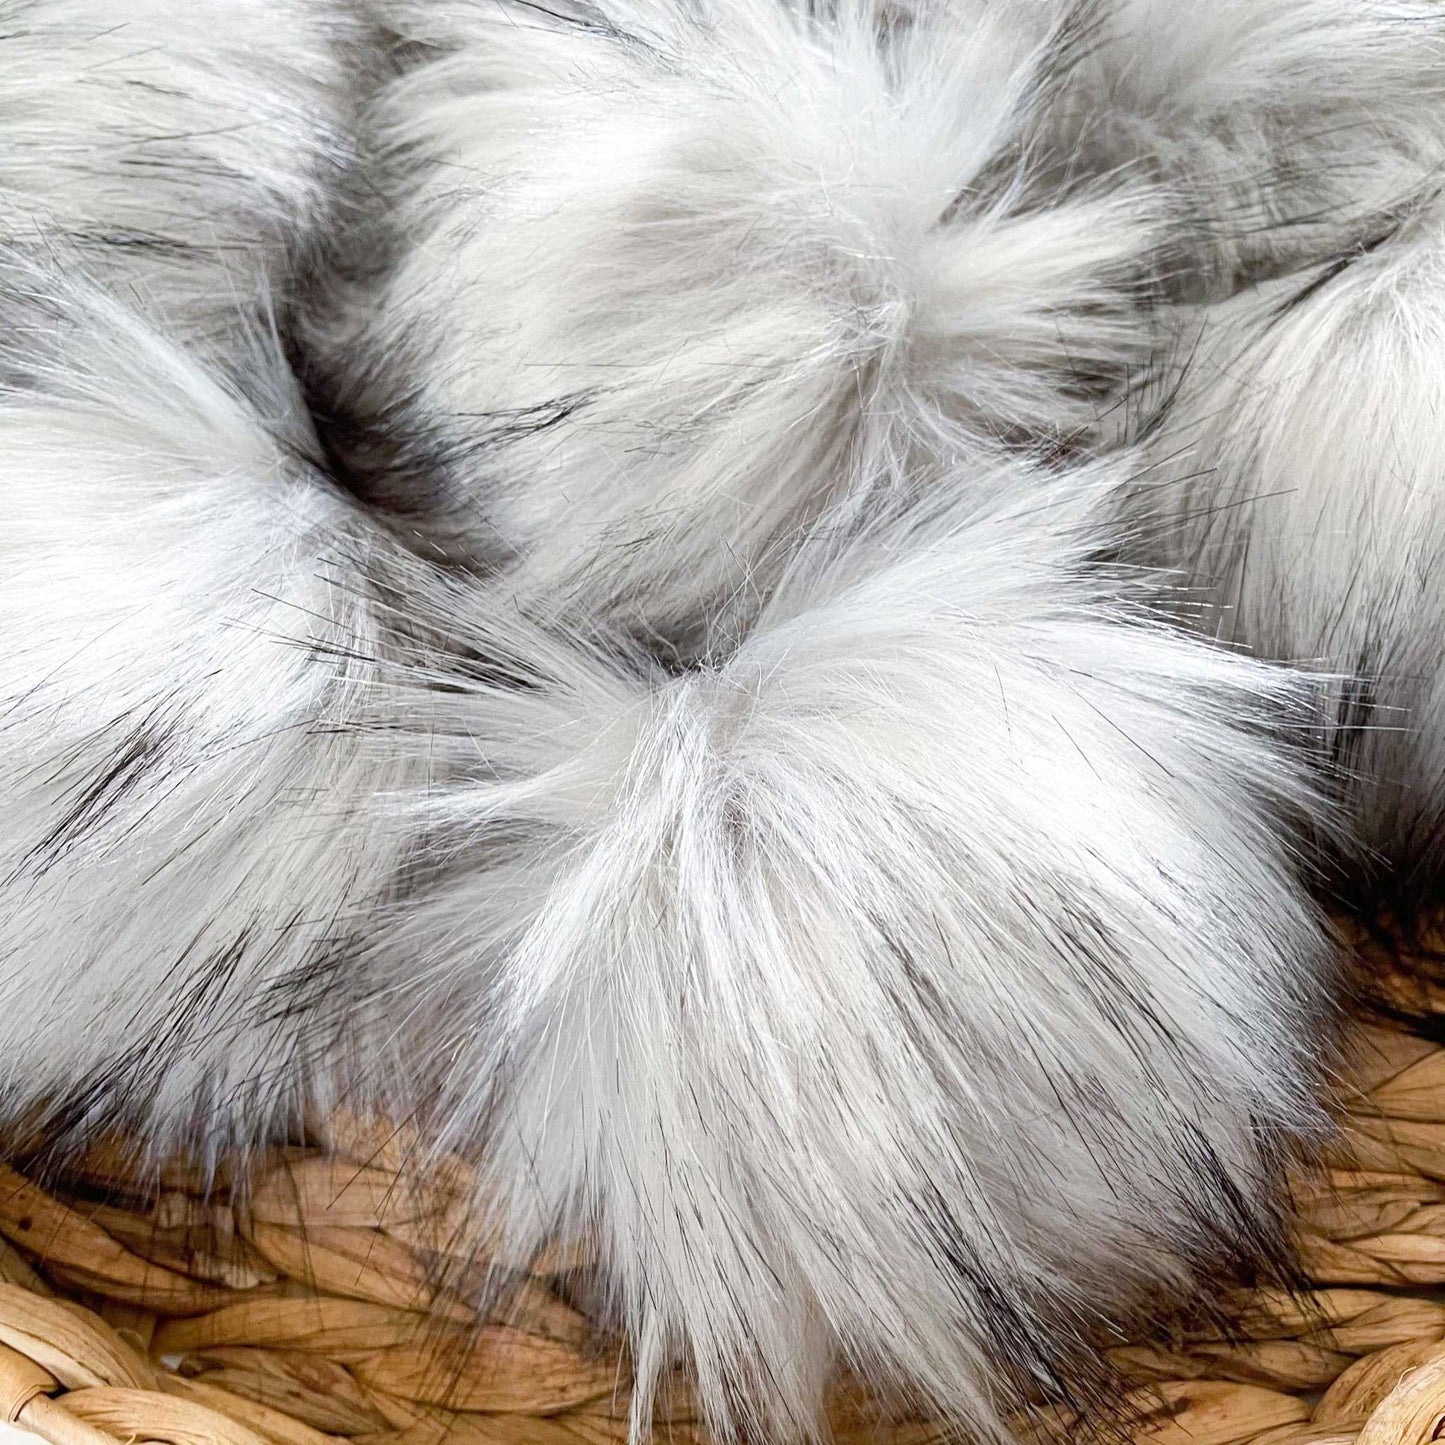 Grey Wolf Faux Fur Fabric by the Yard or Meter | Grey and Black Pompom Fur, Costume, Upholstery, stuffy Faux Fur Fabric 3 $ Buttons & Beans Co.